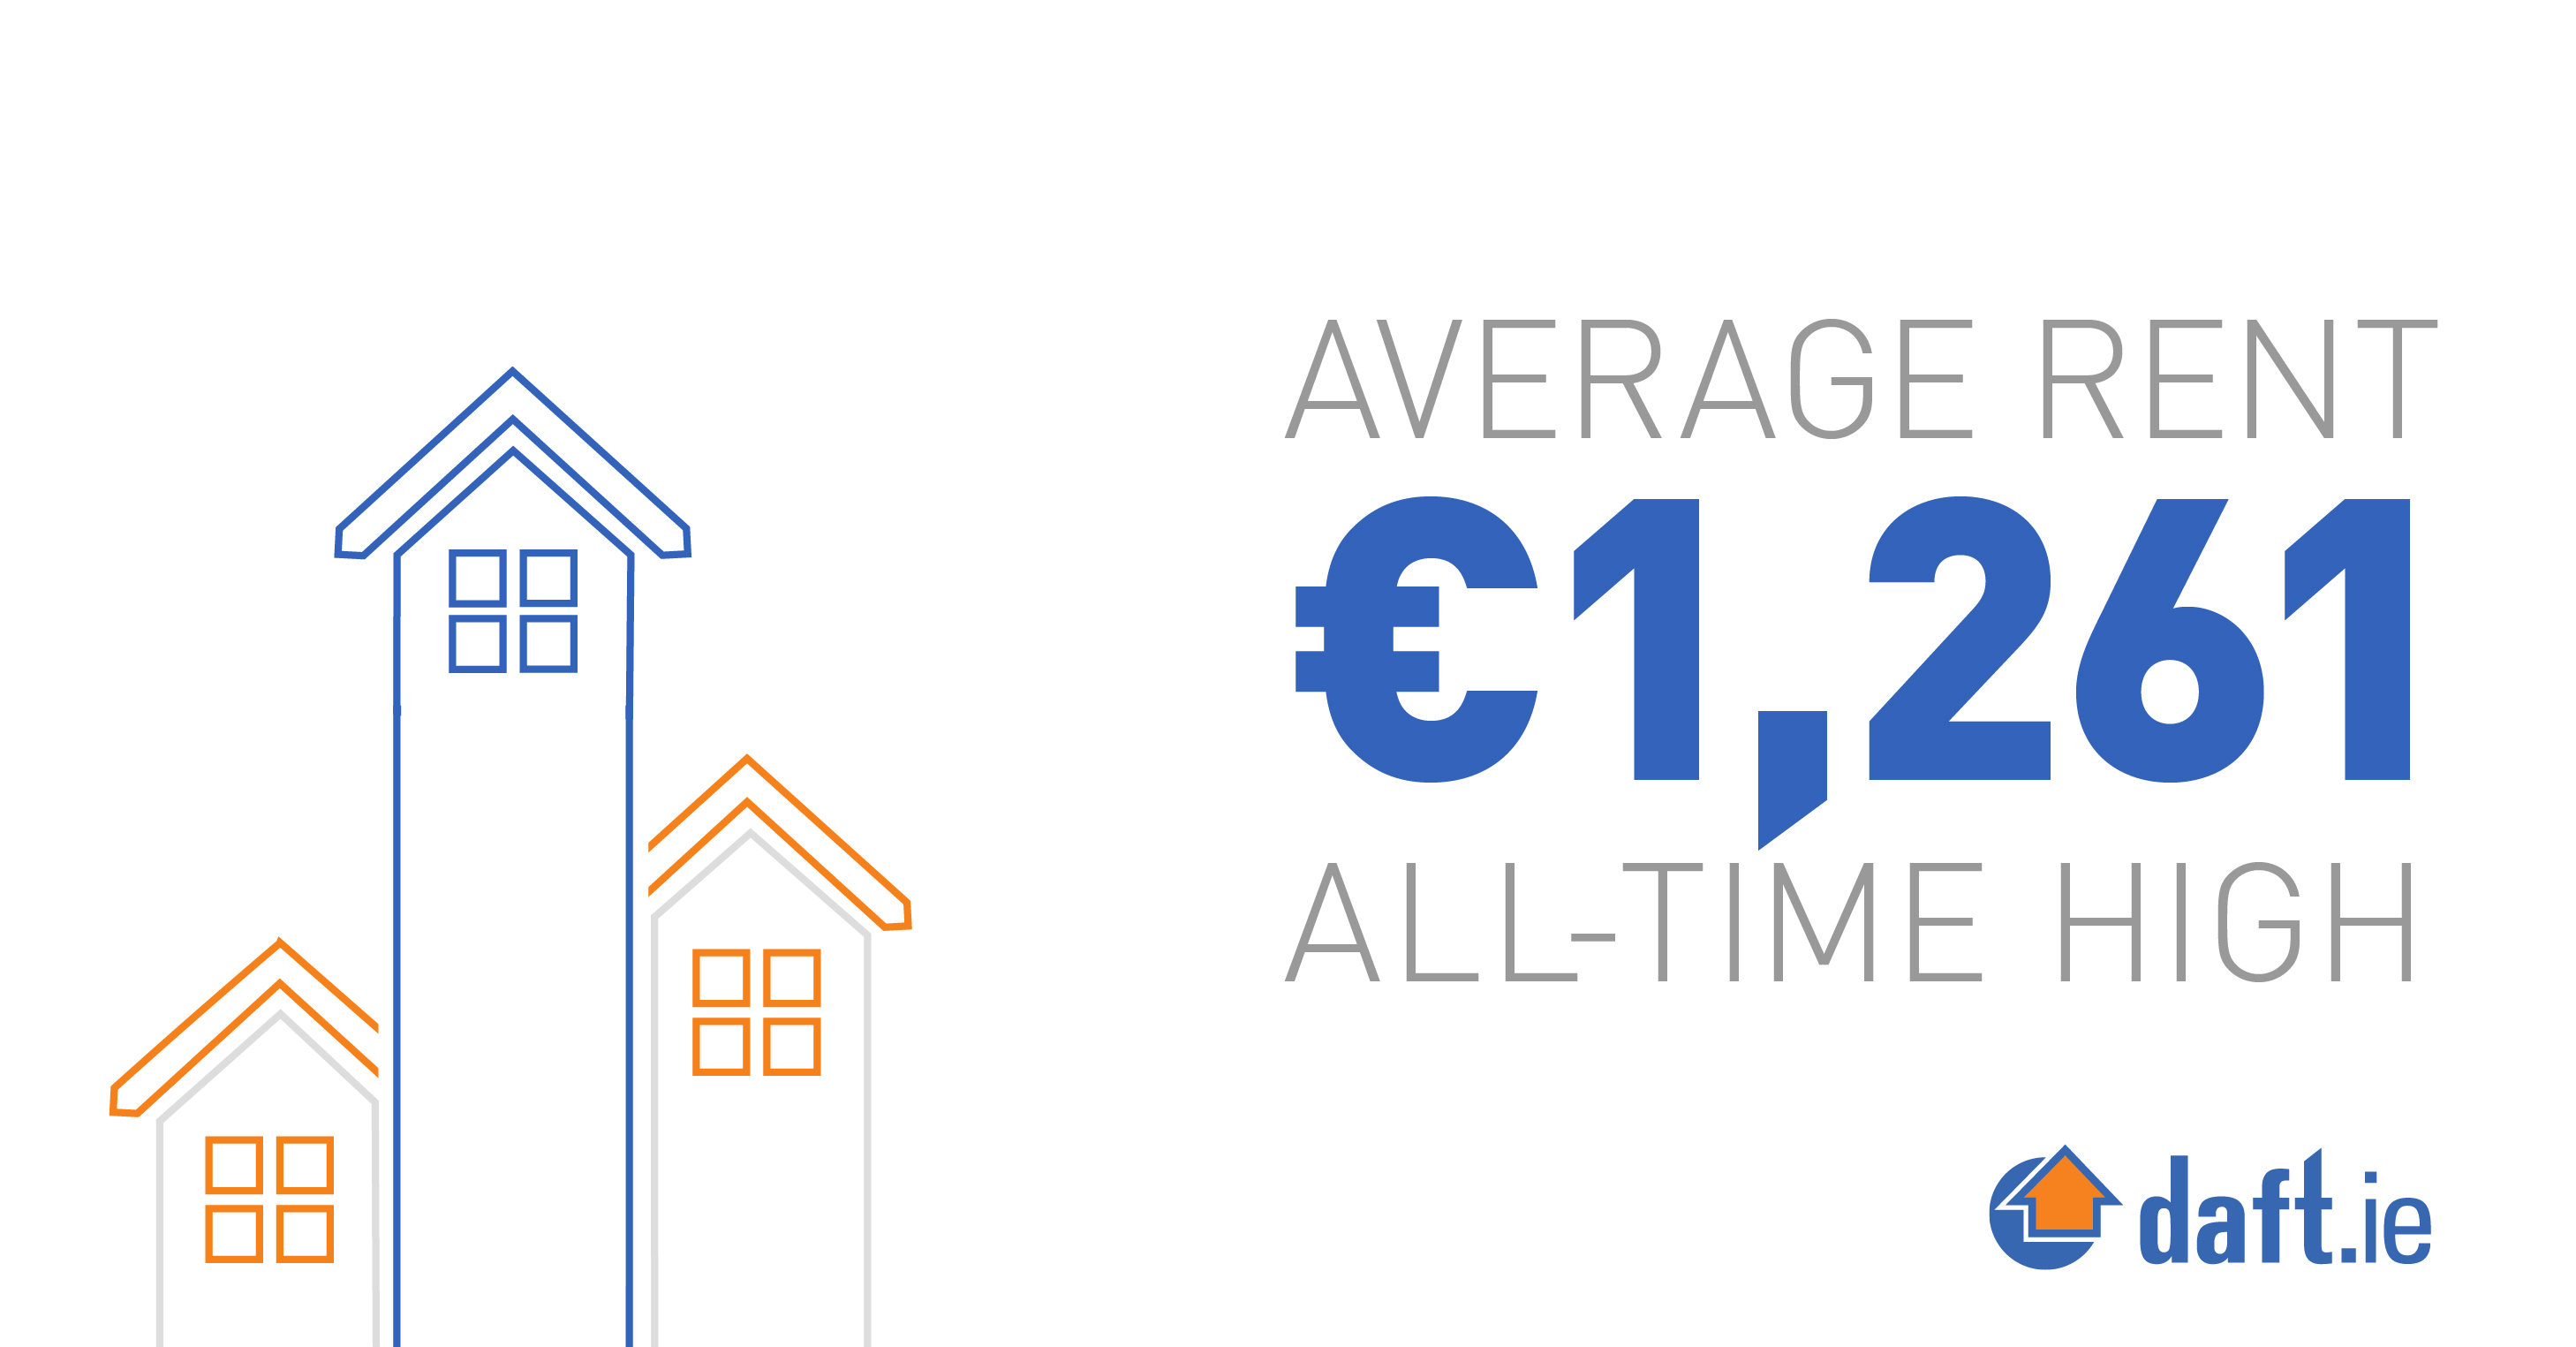 Average Rent, â‚¬1,261 all-time high